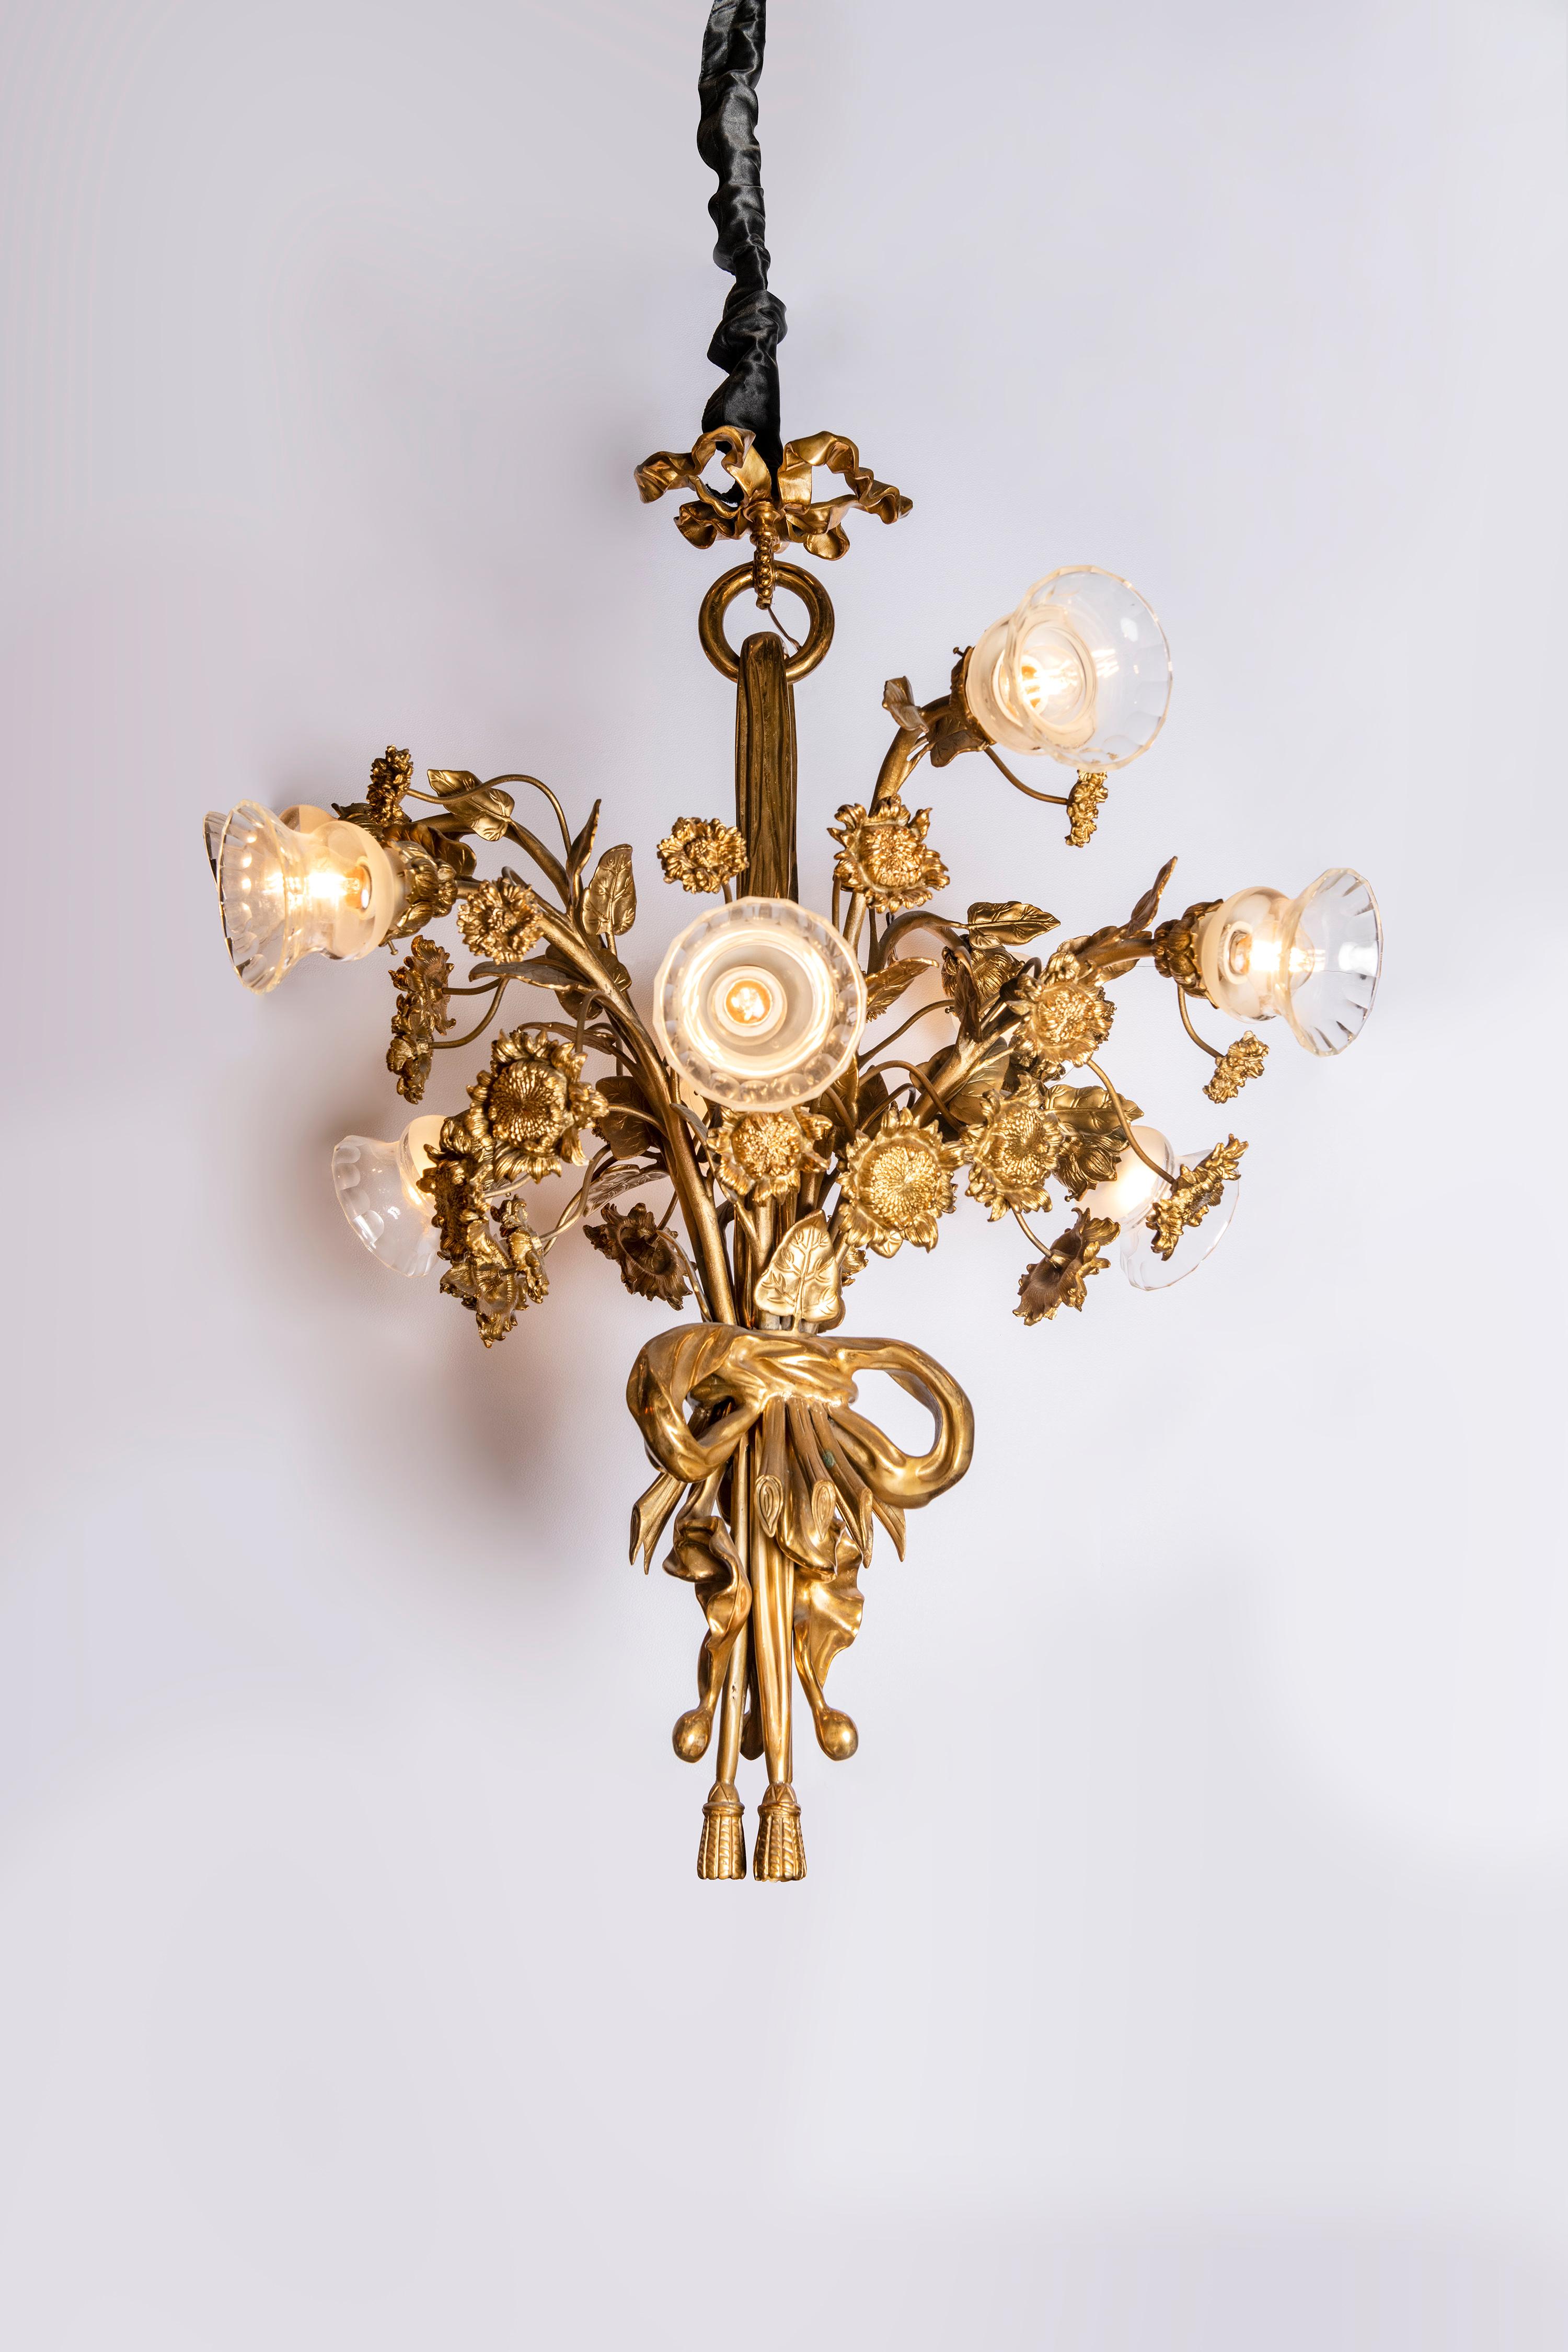 Pair of gilt bronze and glass chandeliers. Art Nouveau period, France, circa 1890.
With 9 lights.